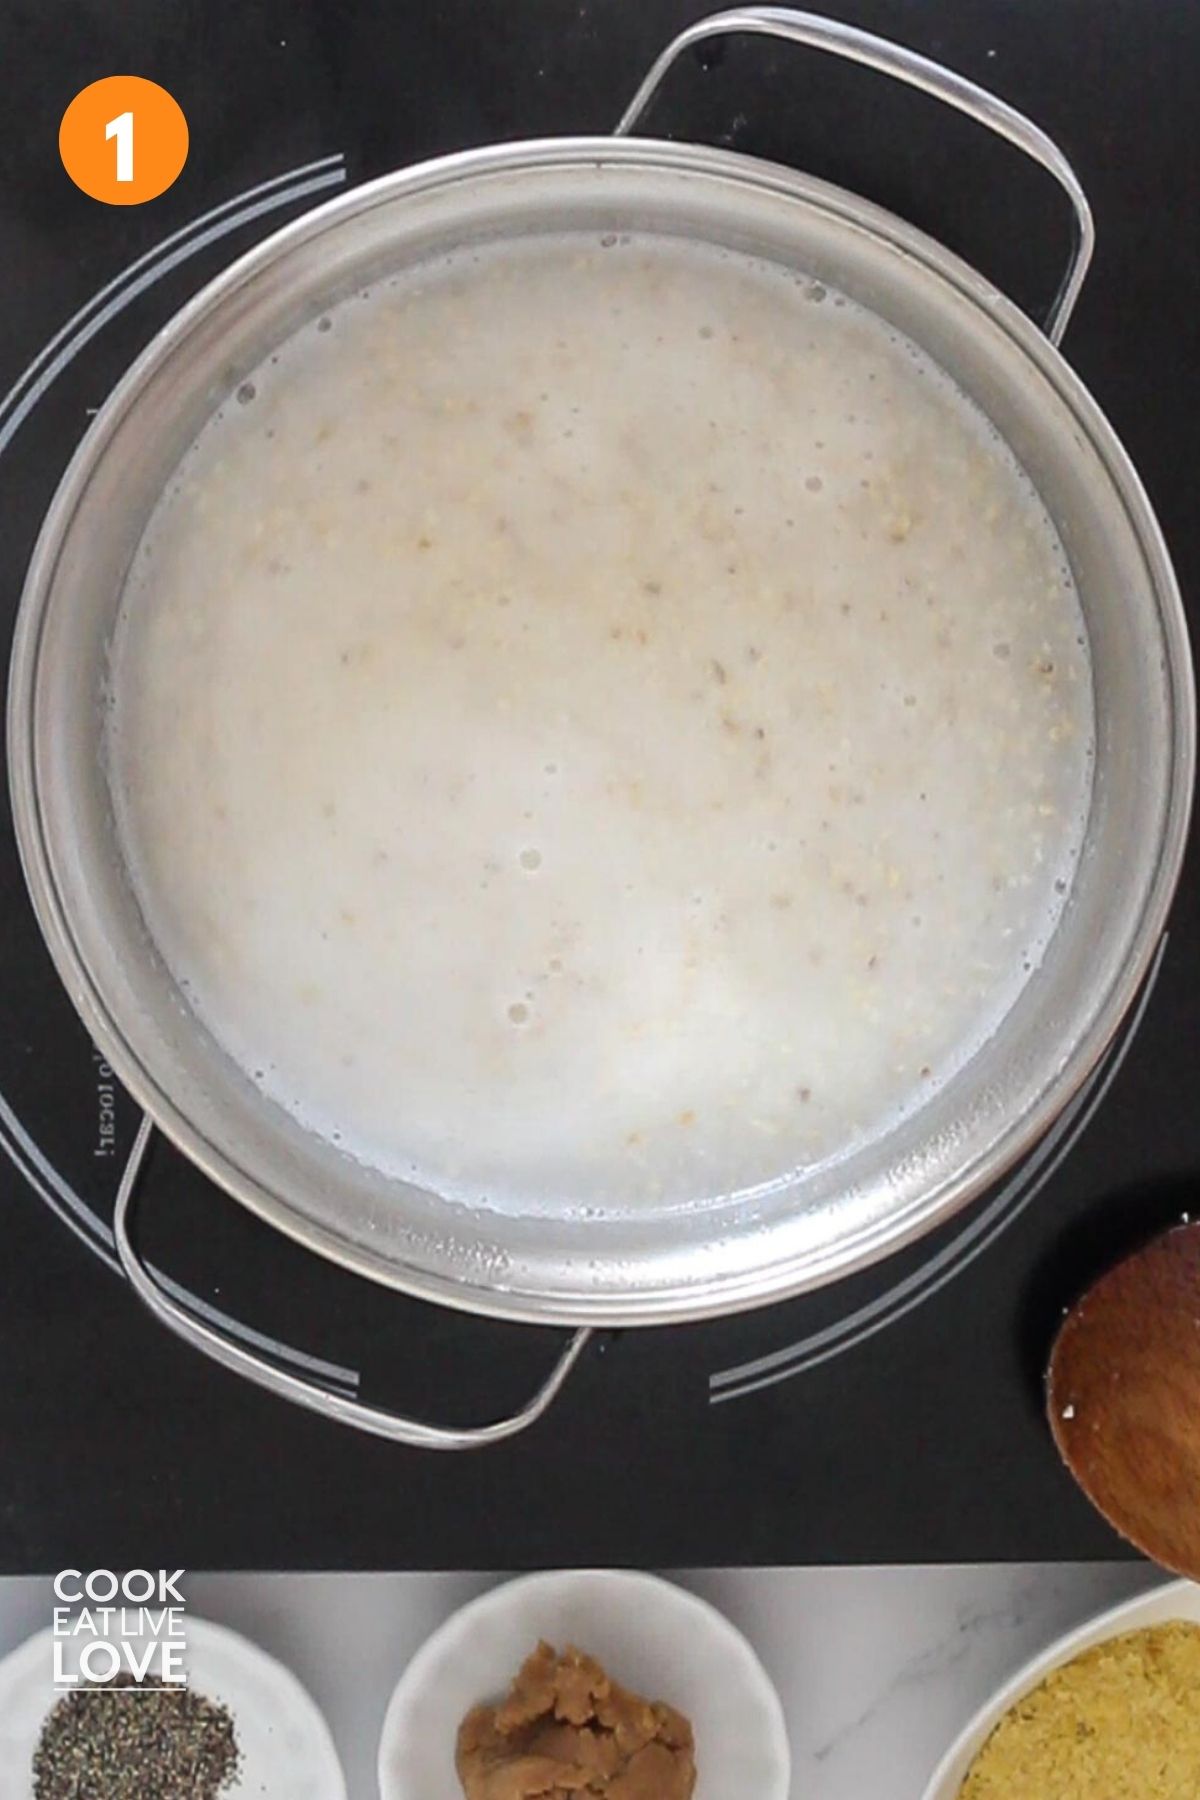 Grits added to boiling water in a pot.